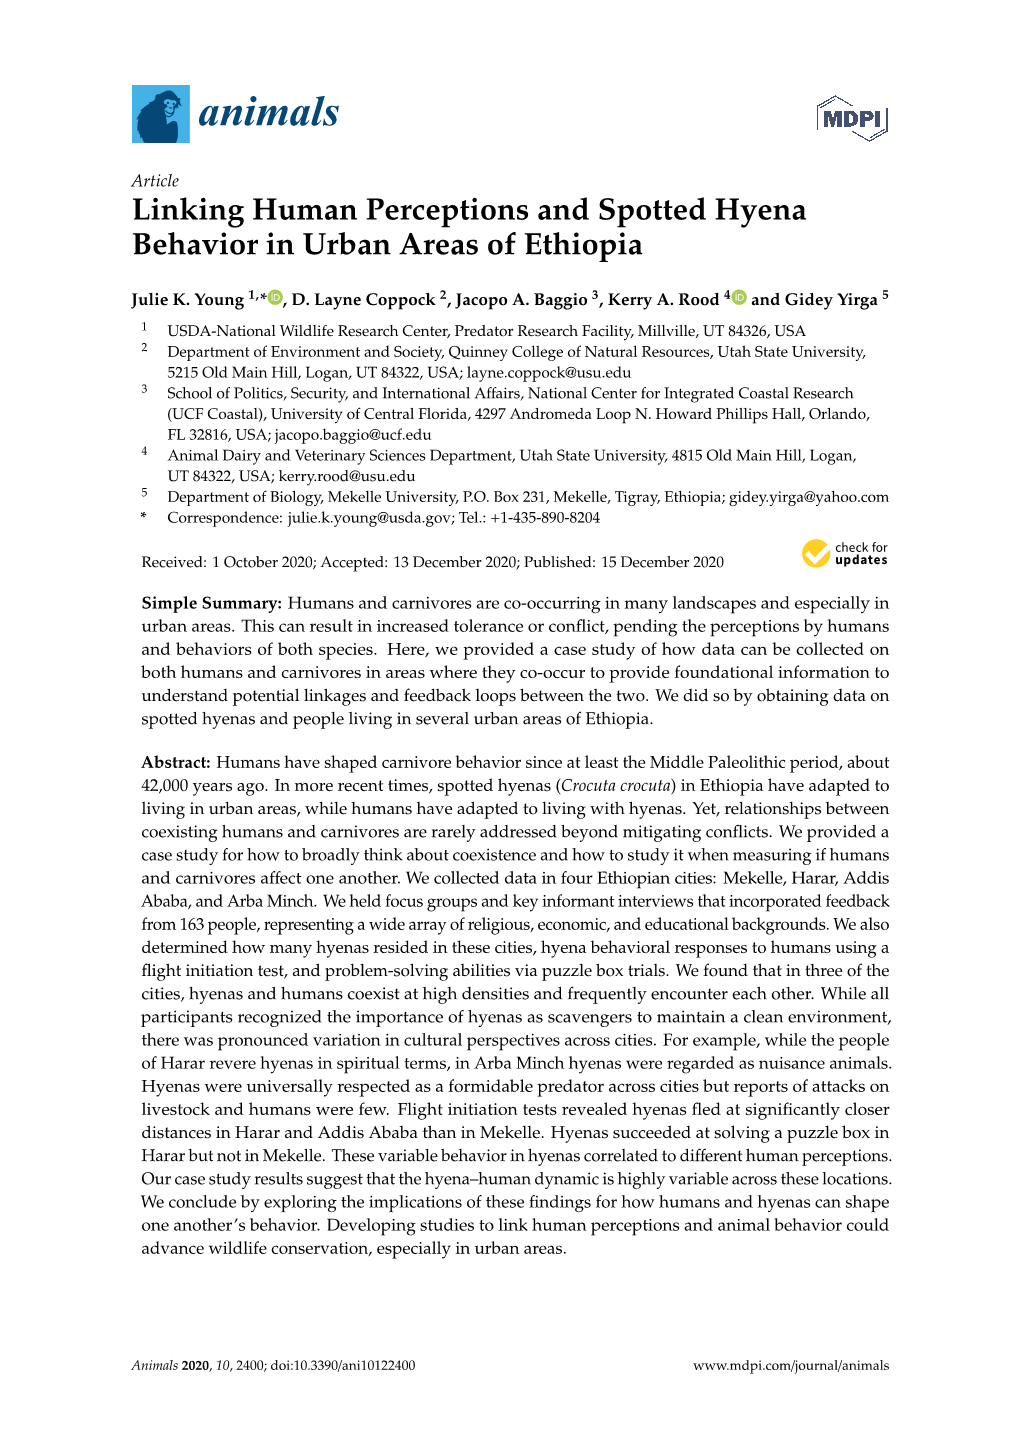 Linking Human Perceptions and Spotted Hyena Behavior in Urban Areas of Ethiopia